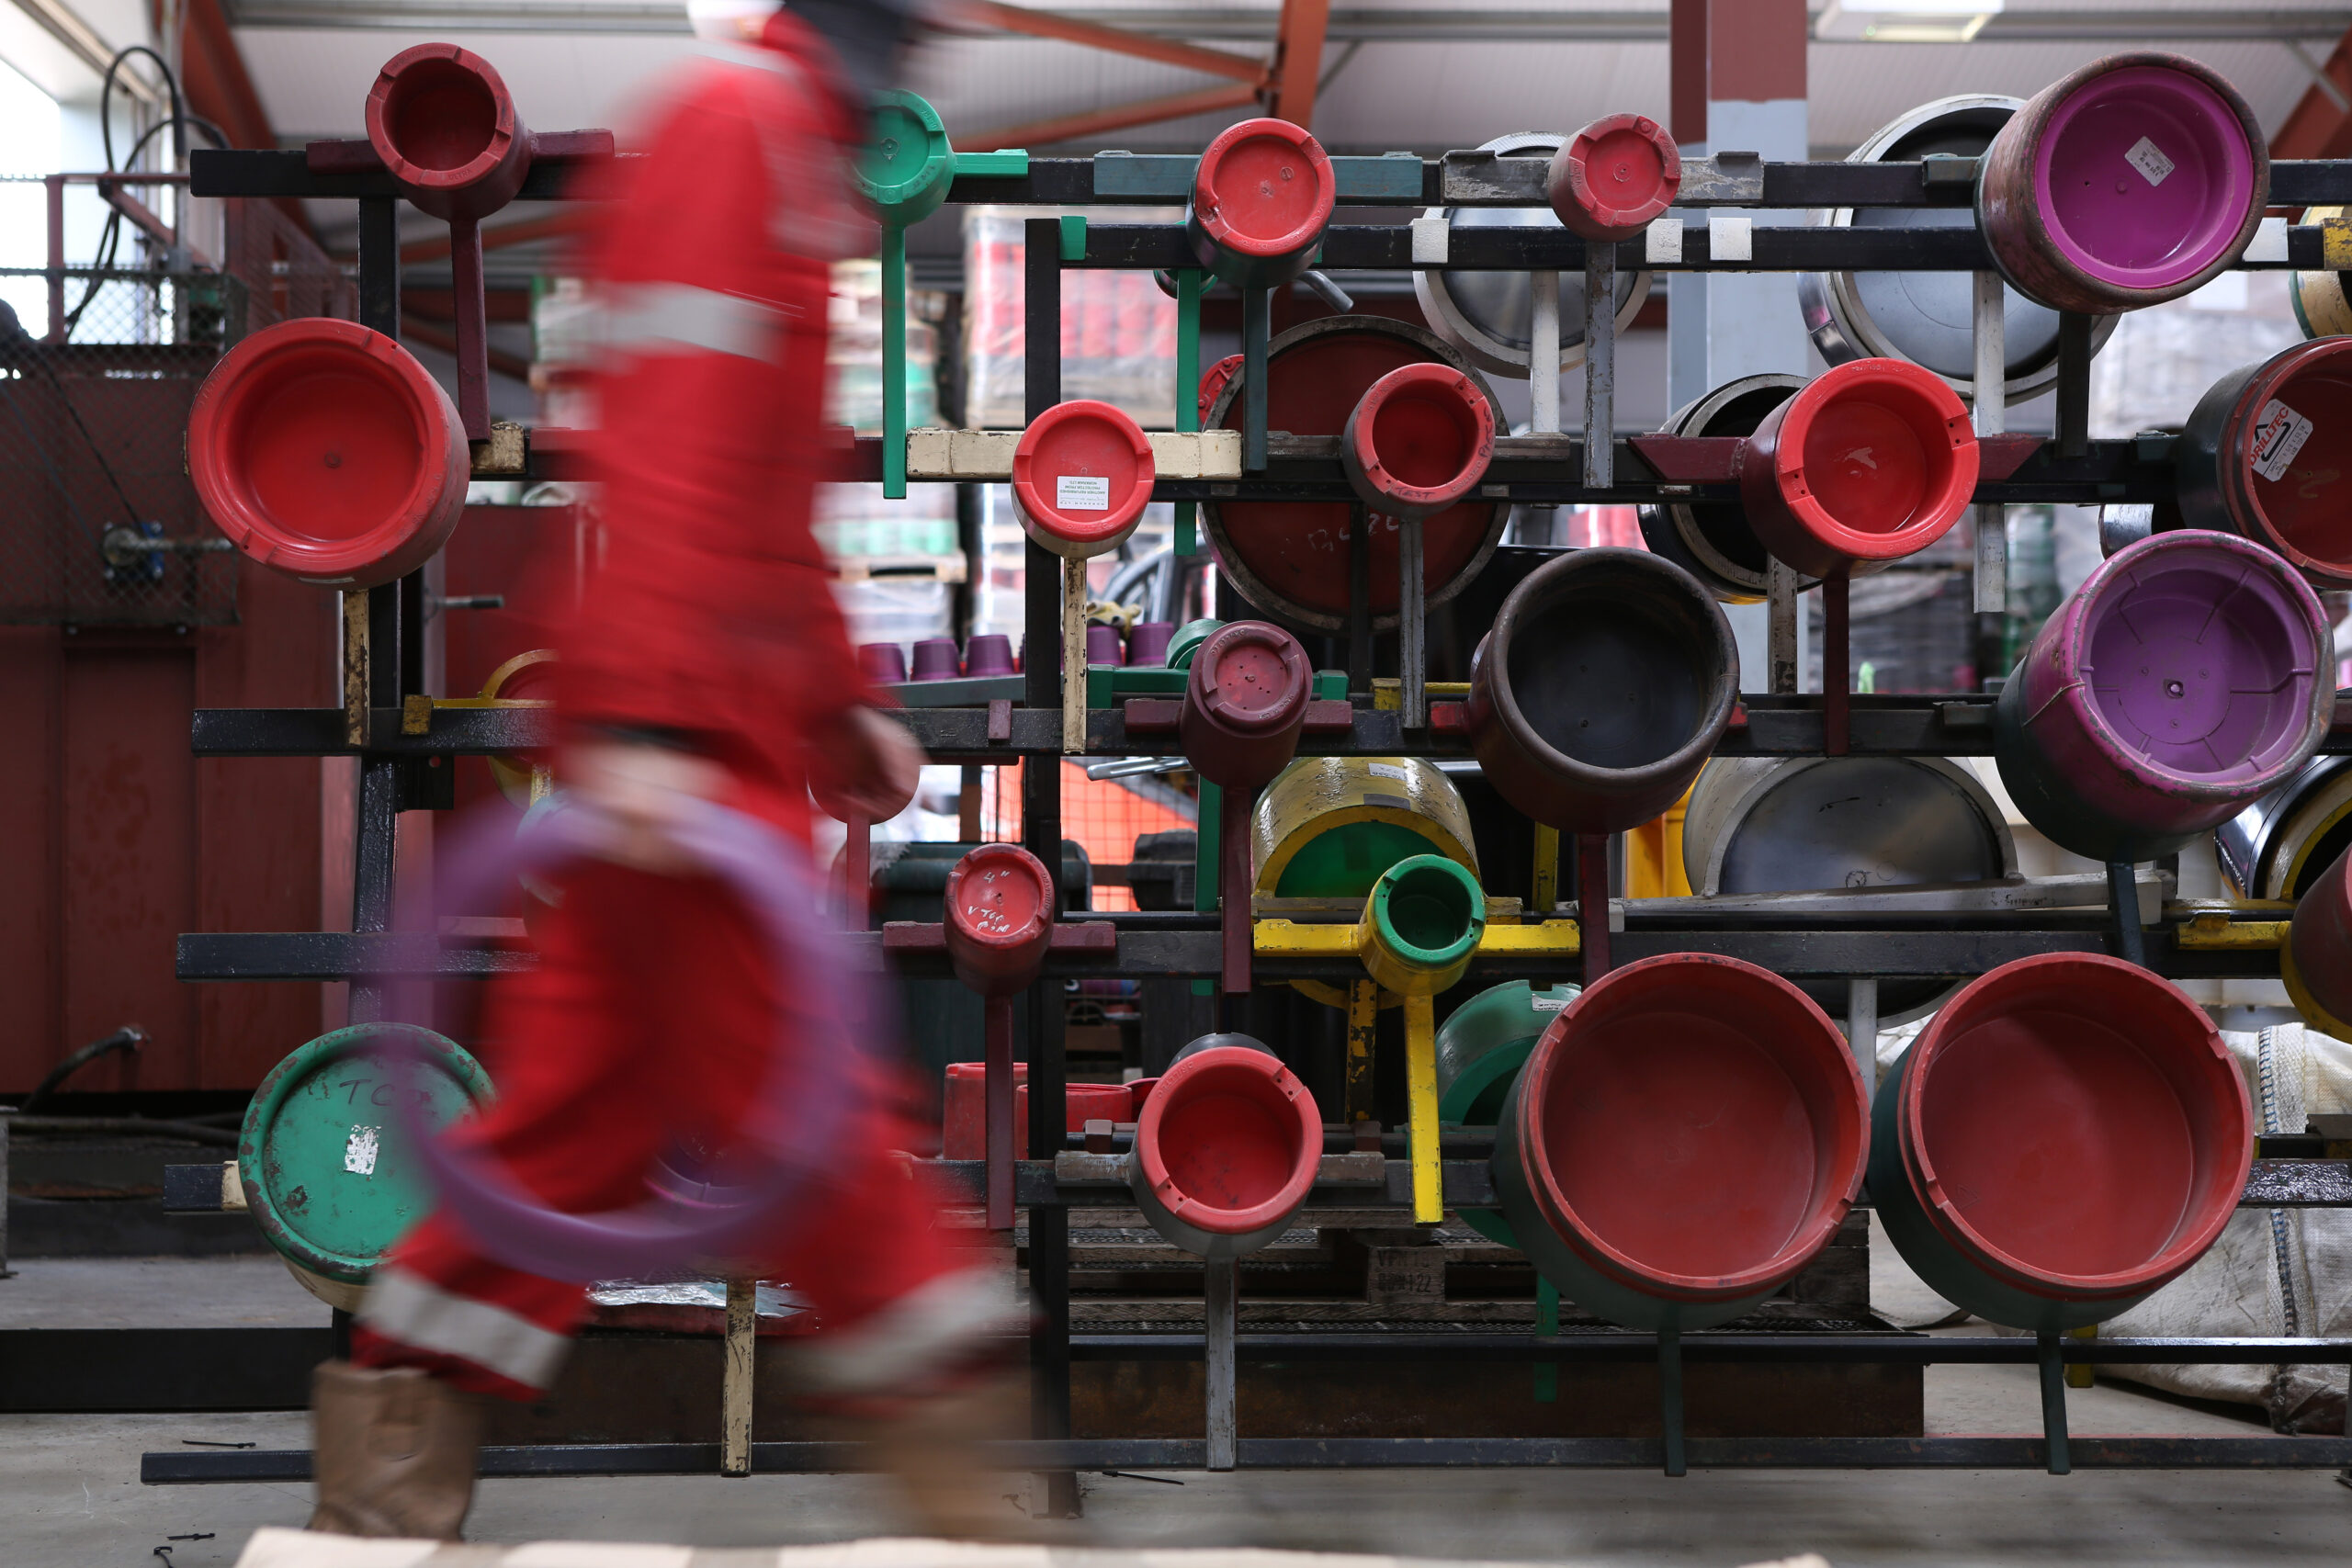 An employee of Norkram Ltd based in Peterhead walks past a rack of thread protectors testers holding a bumper ring made from recyclable plastics for the oil and gas industry